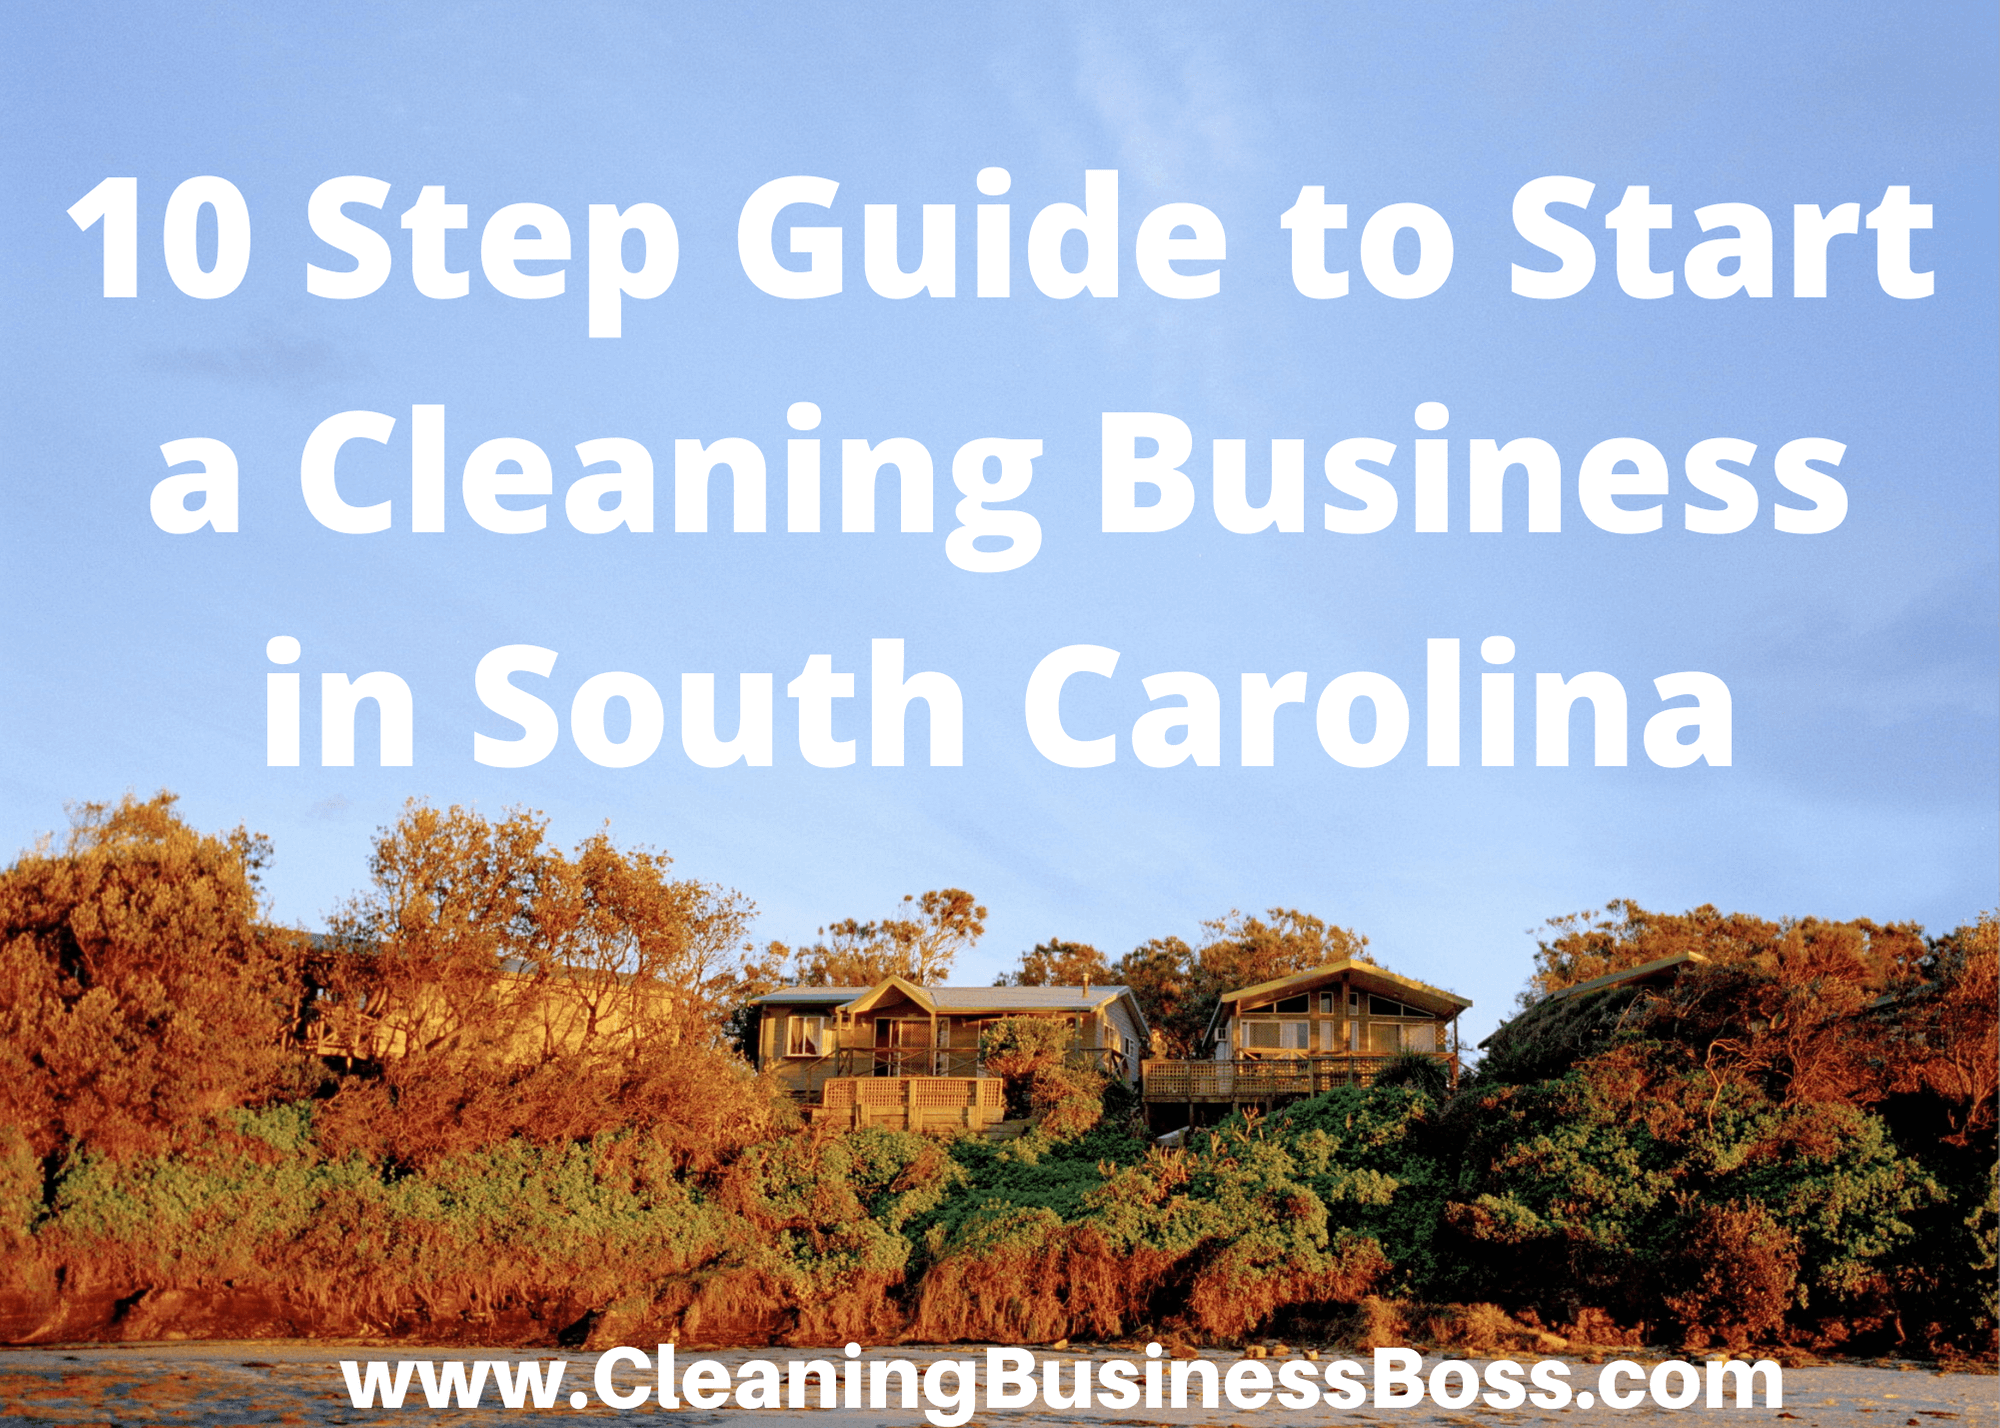 10 Step Guide to Start a Cleaning Business in South Carolina